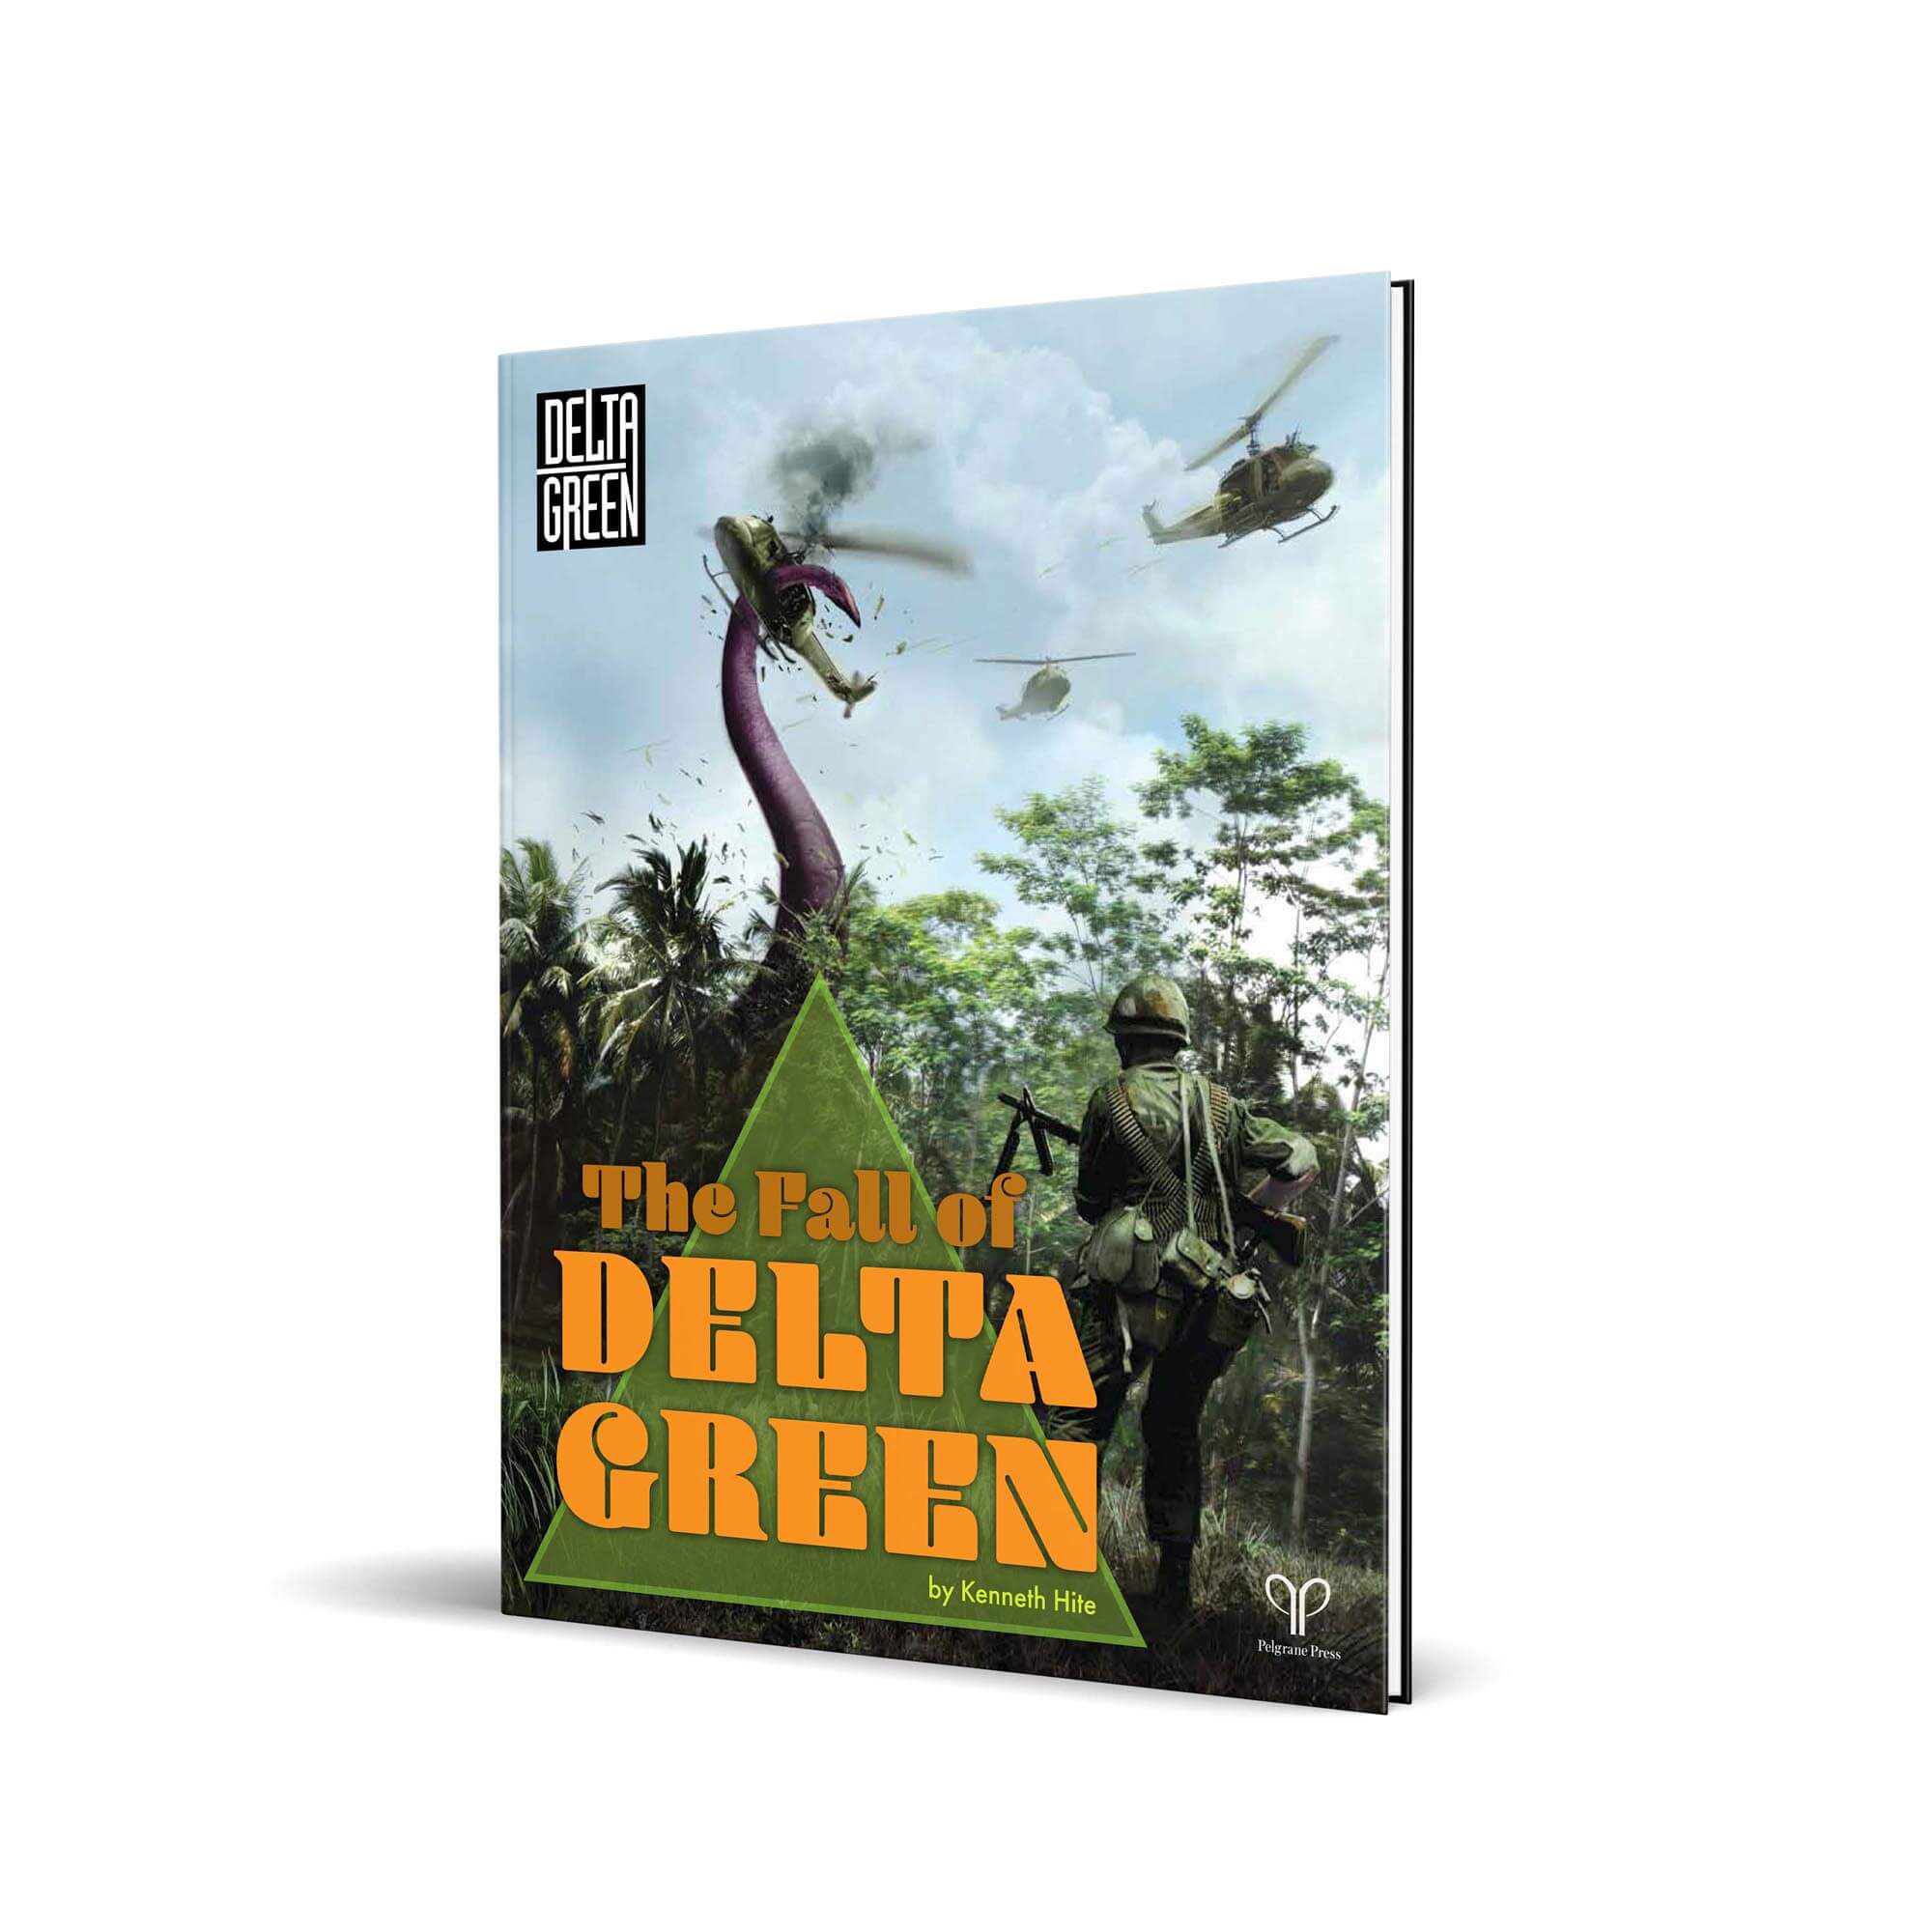 The Fall of DELTA GREEN